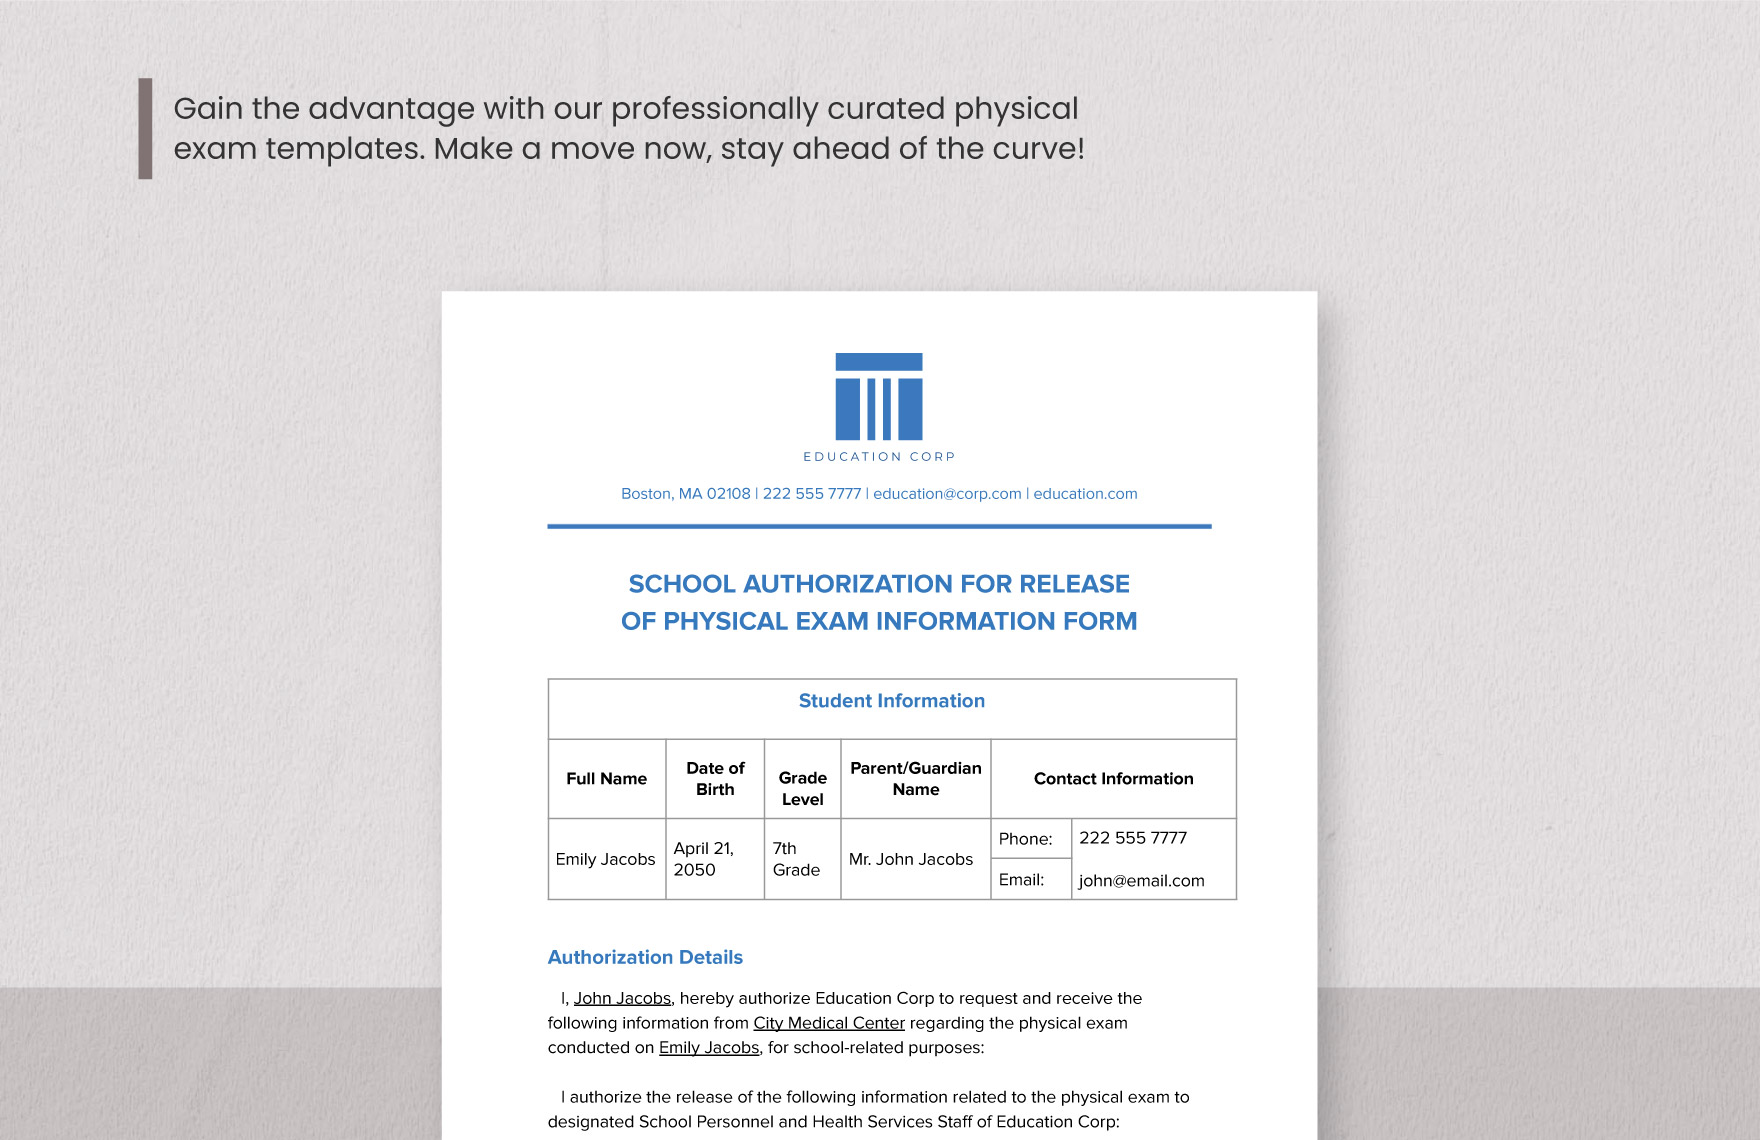 School Authorization for Release of Physical Exam Information Form Template